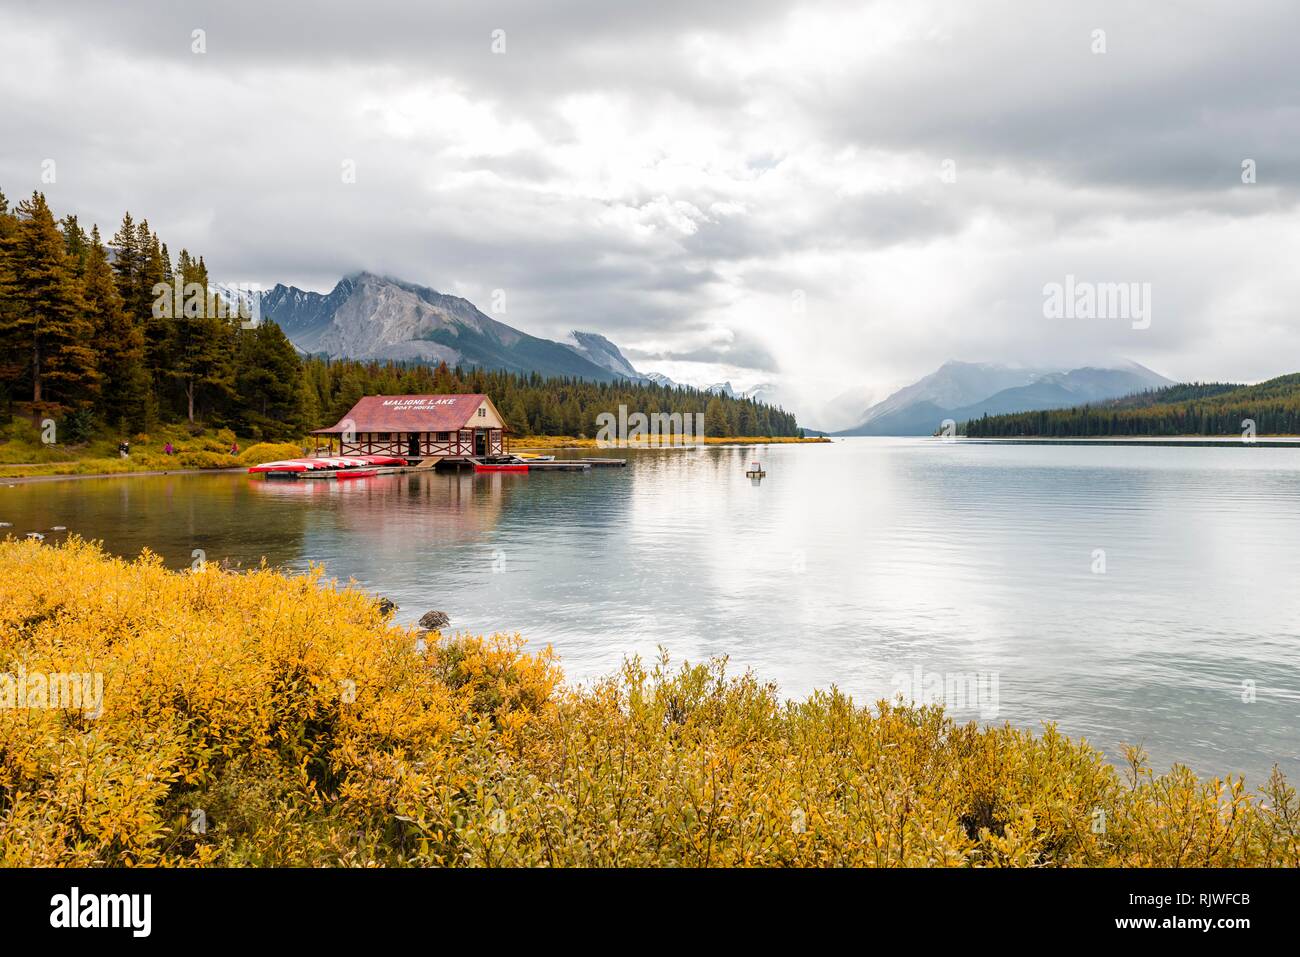 Curly Phillips Boathouse, historic boathouse on the lakeshore of Maligne Lake, Queen Elizabeth Ranges mountain chain behind Stock Photo